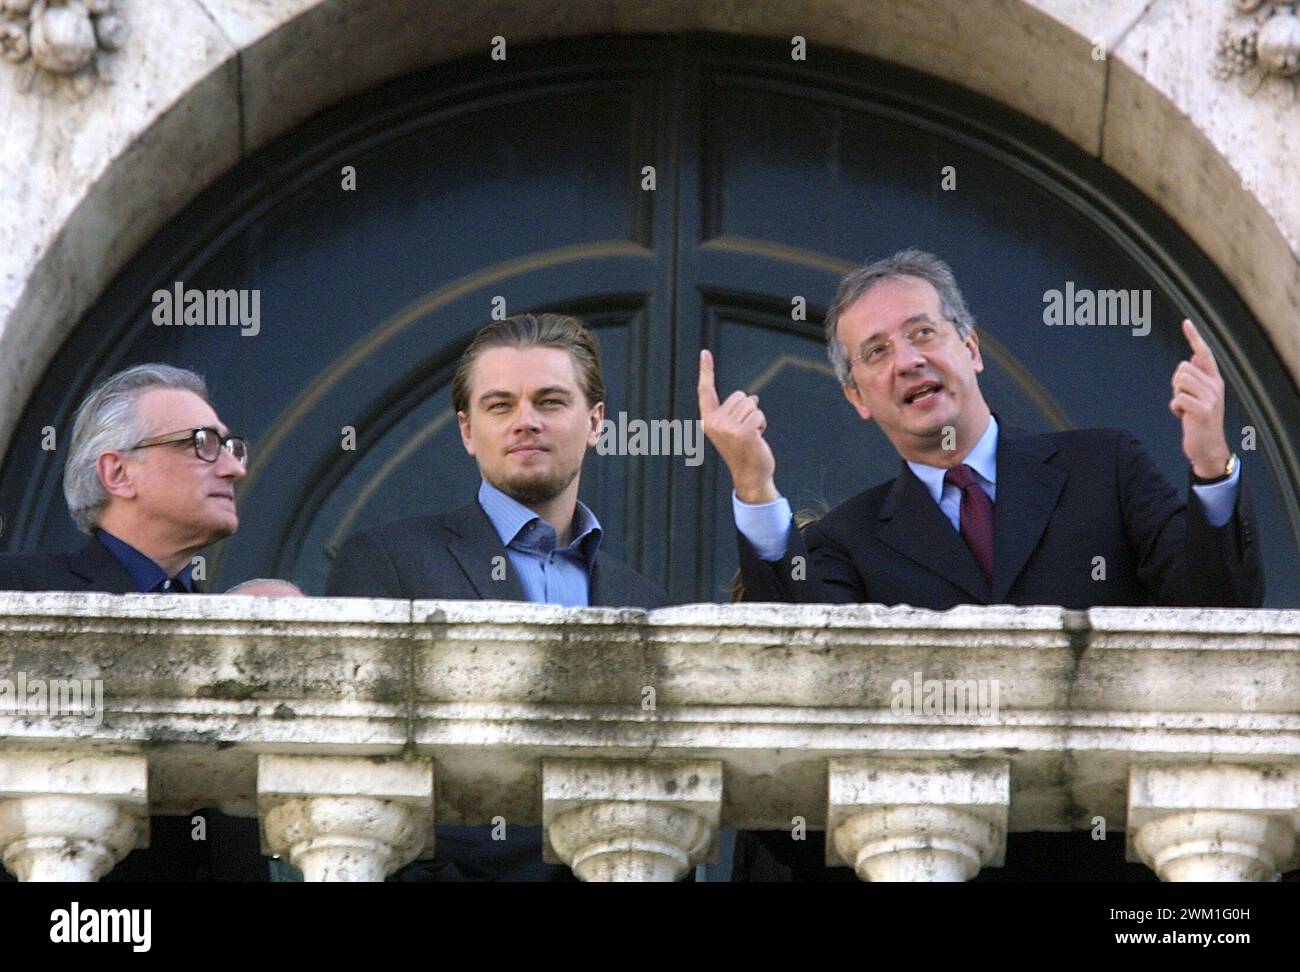 4068563 Rome Campidoglio, January 11, 2003. Director Martin Scorsese and actor Leonardo DiCaprio, in Rome to present the movie Gangs of New York, and mayor of Rome Walter Veltroni (photo); (add.info.: Rome; Roma, Italy; Italia, Campidoglio  Roma, Campidoglio, 11 gennaio 2003. Il regista Martin Scorsese e l'attore Leonardo DiCaprio, a Roma per presentare il film Gangs of New York, con il sindaco di Roma Walter Veltroni); © Marcello Mencarini. All rights reserved 2024. Stock Photo